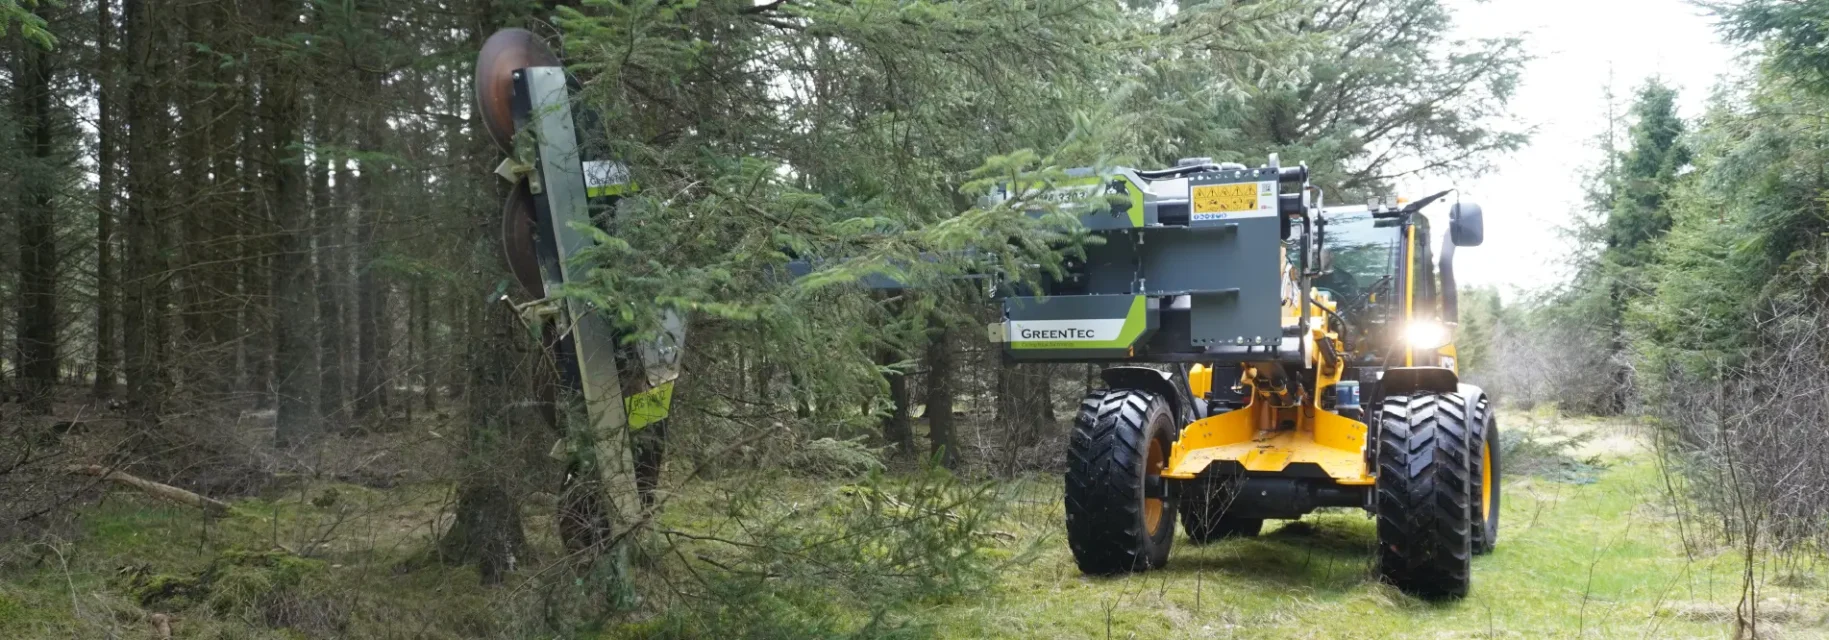 Tree trimming in forest with telescopic loader